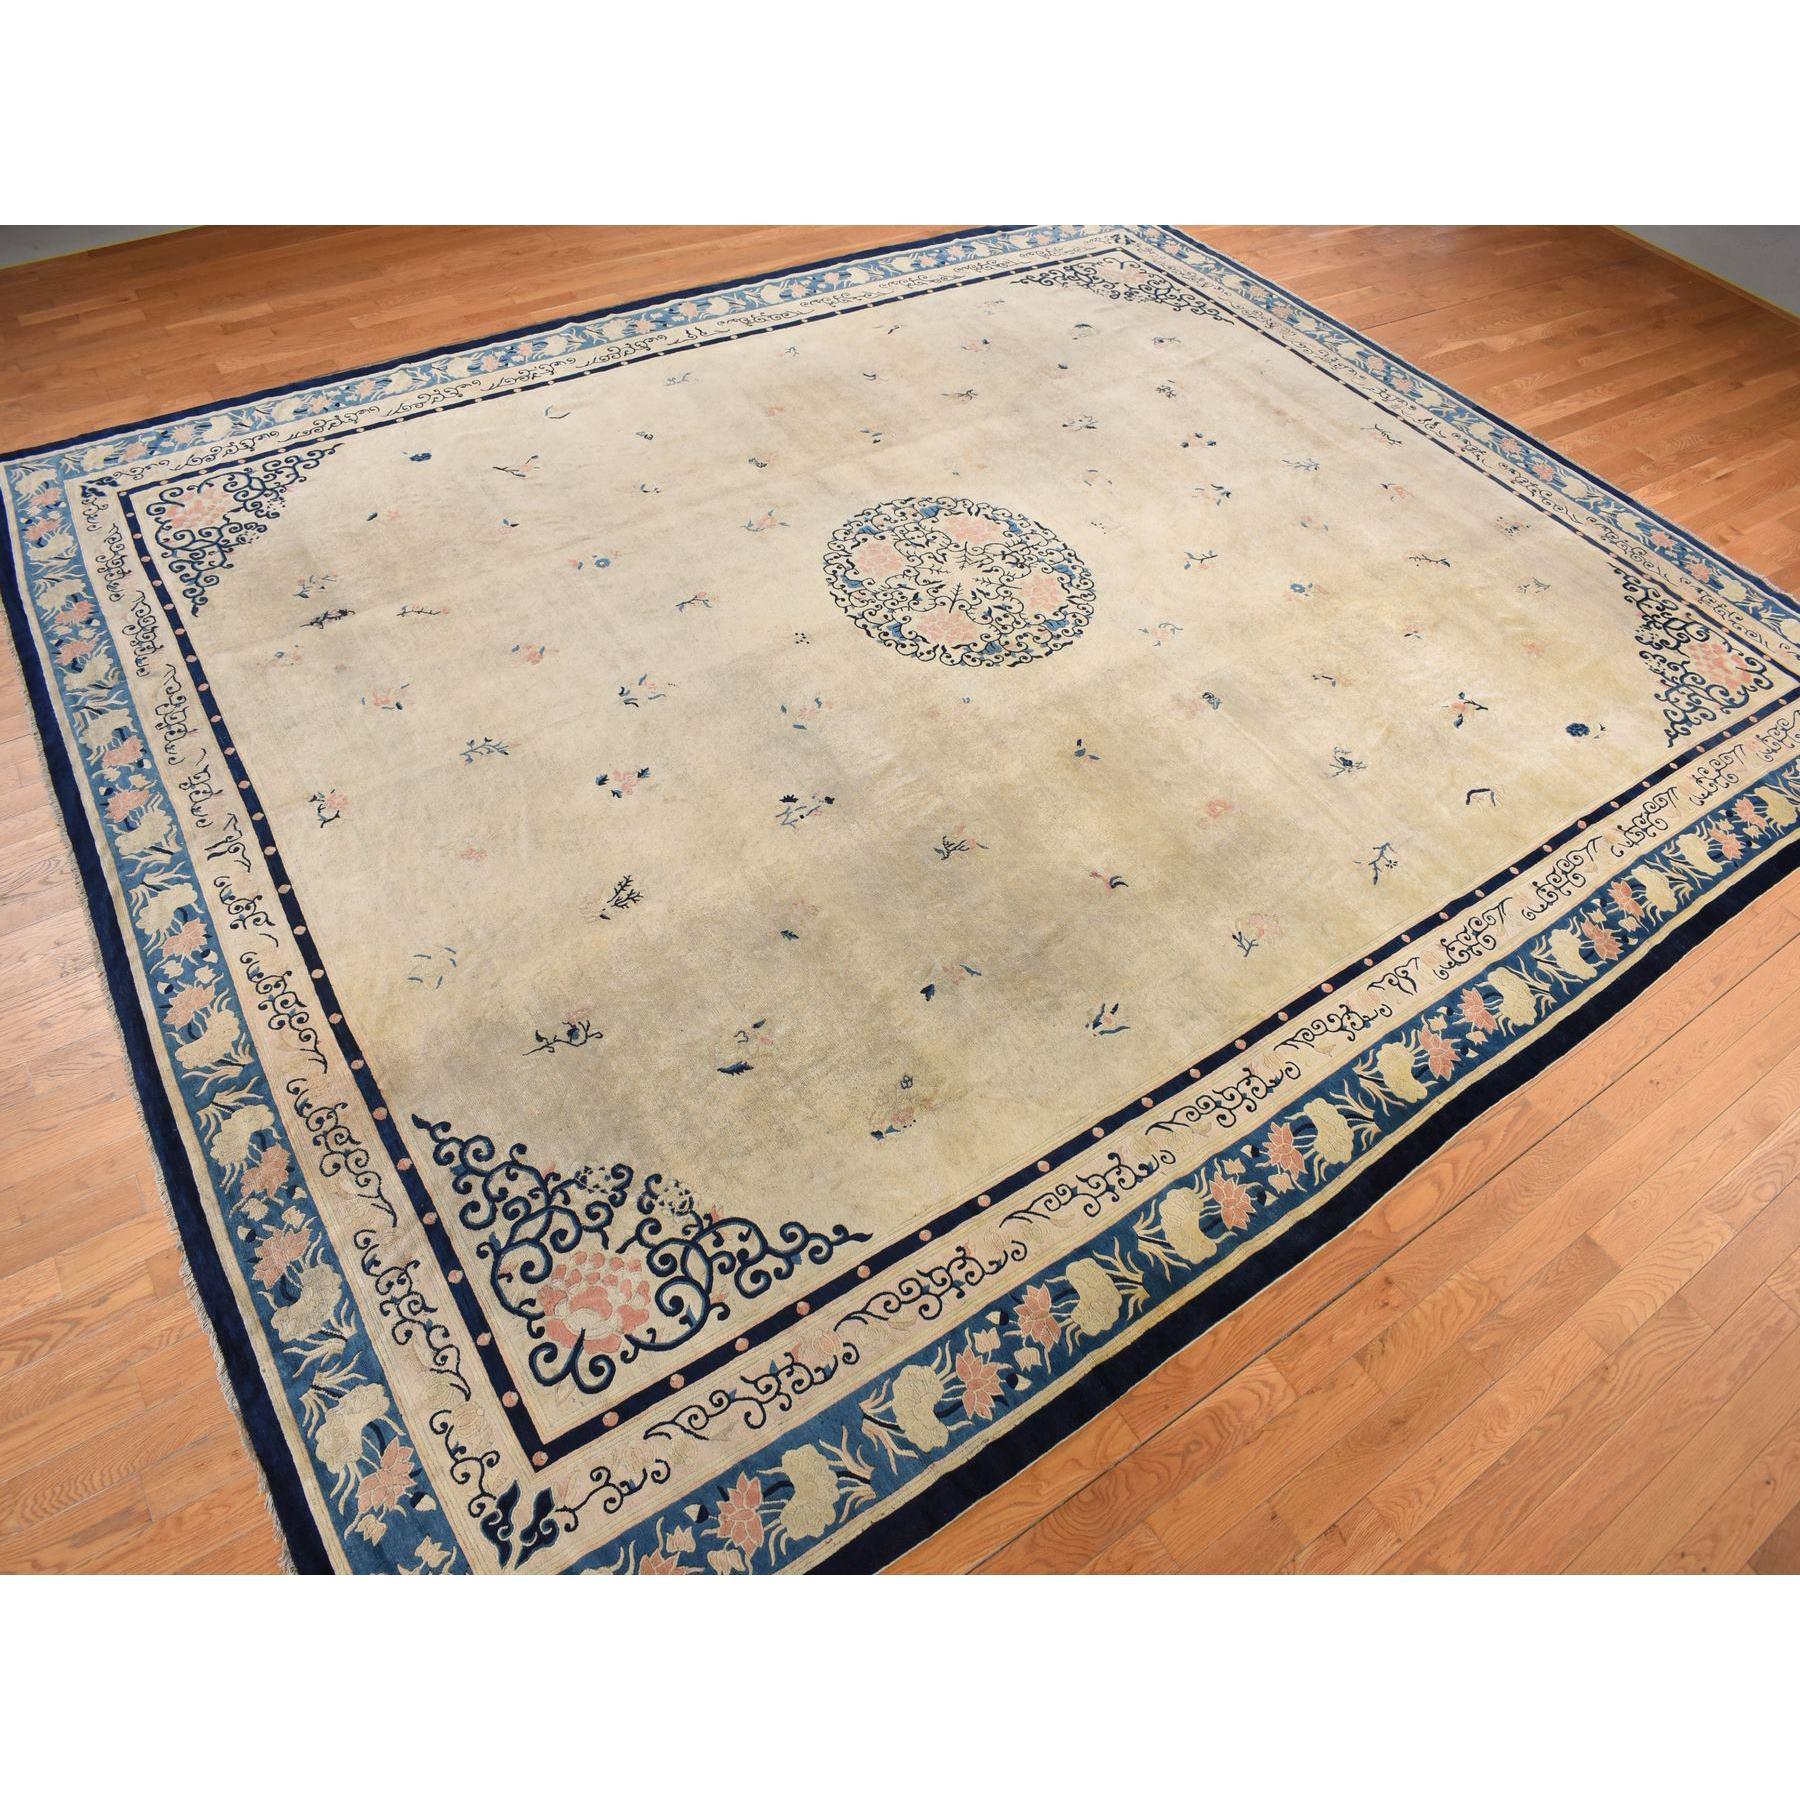 Medieval Boulder Ivory Antique Chinese Peking Wool Hand Knotted Oriental Rug 12'x14'1